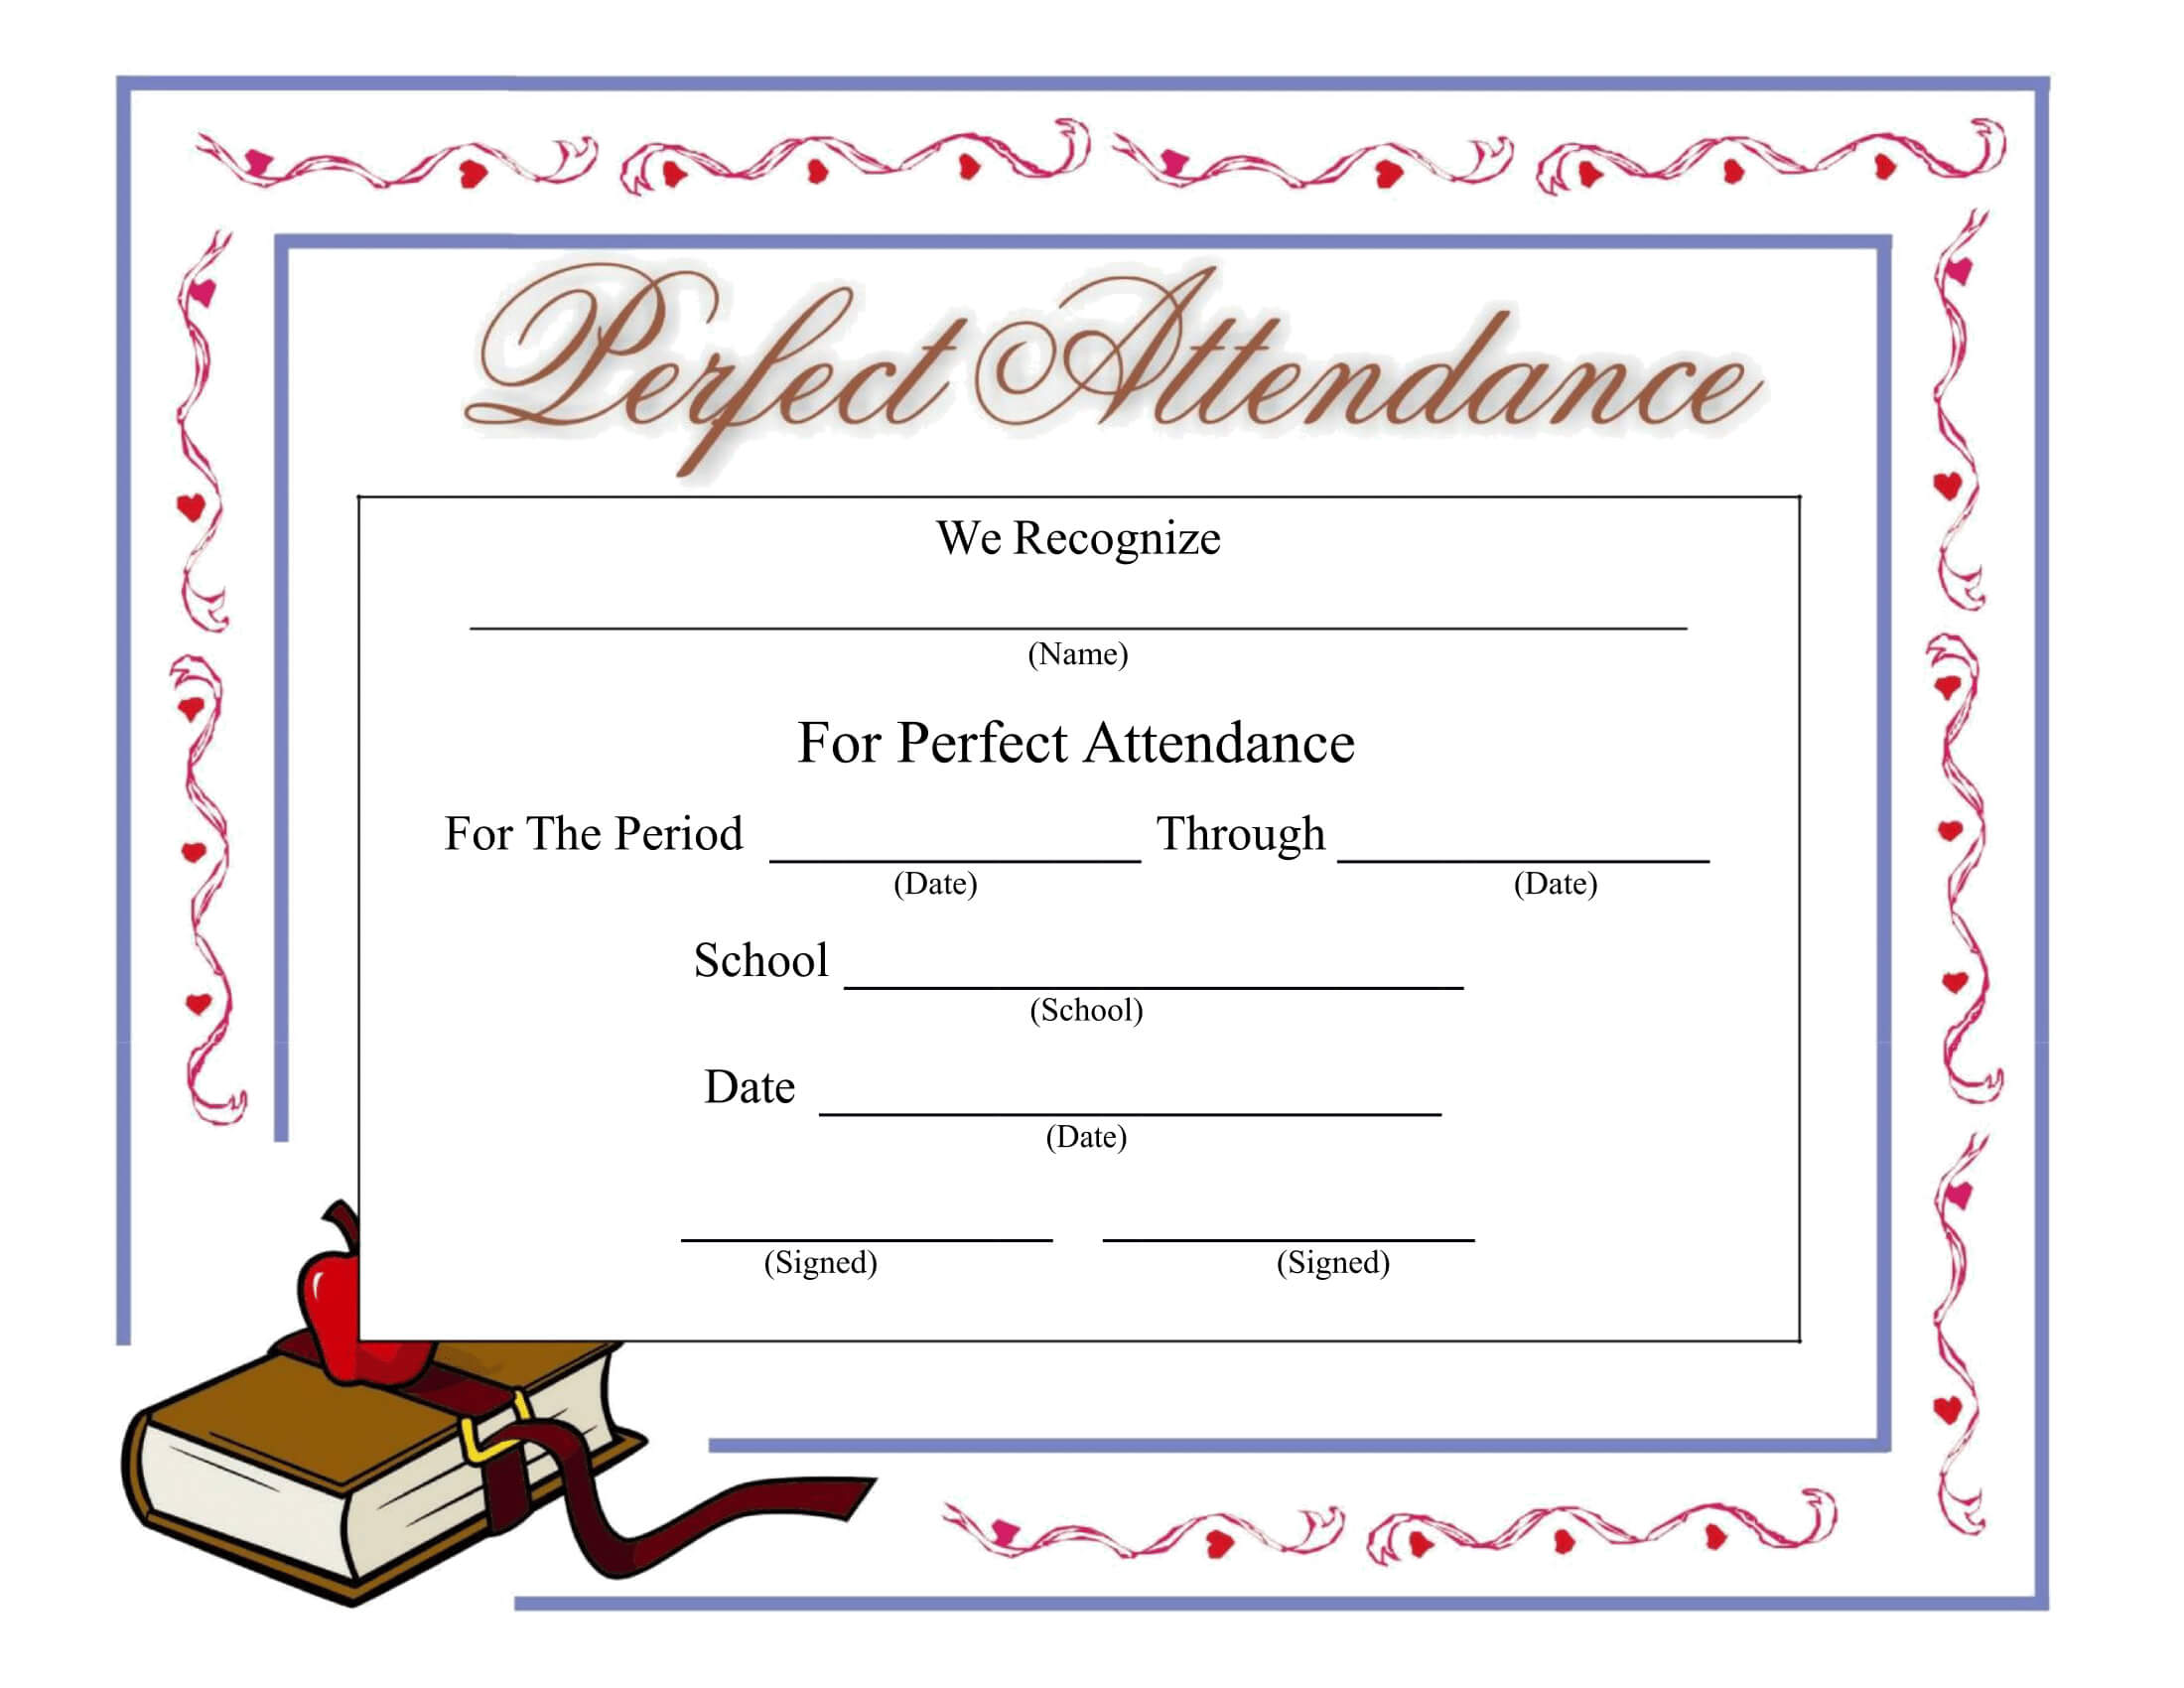 Perfect Attendance Certificate - Download A Free Template Within Perfect Attendance Certificate Free Template